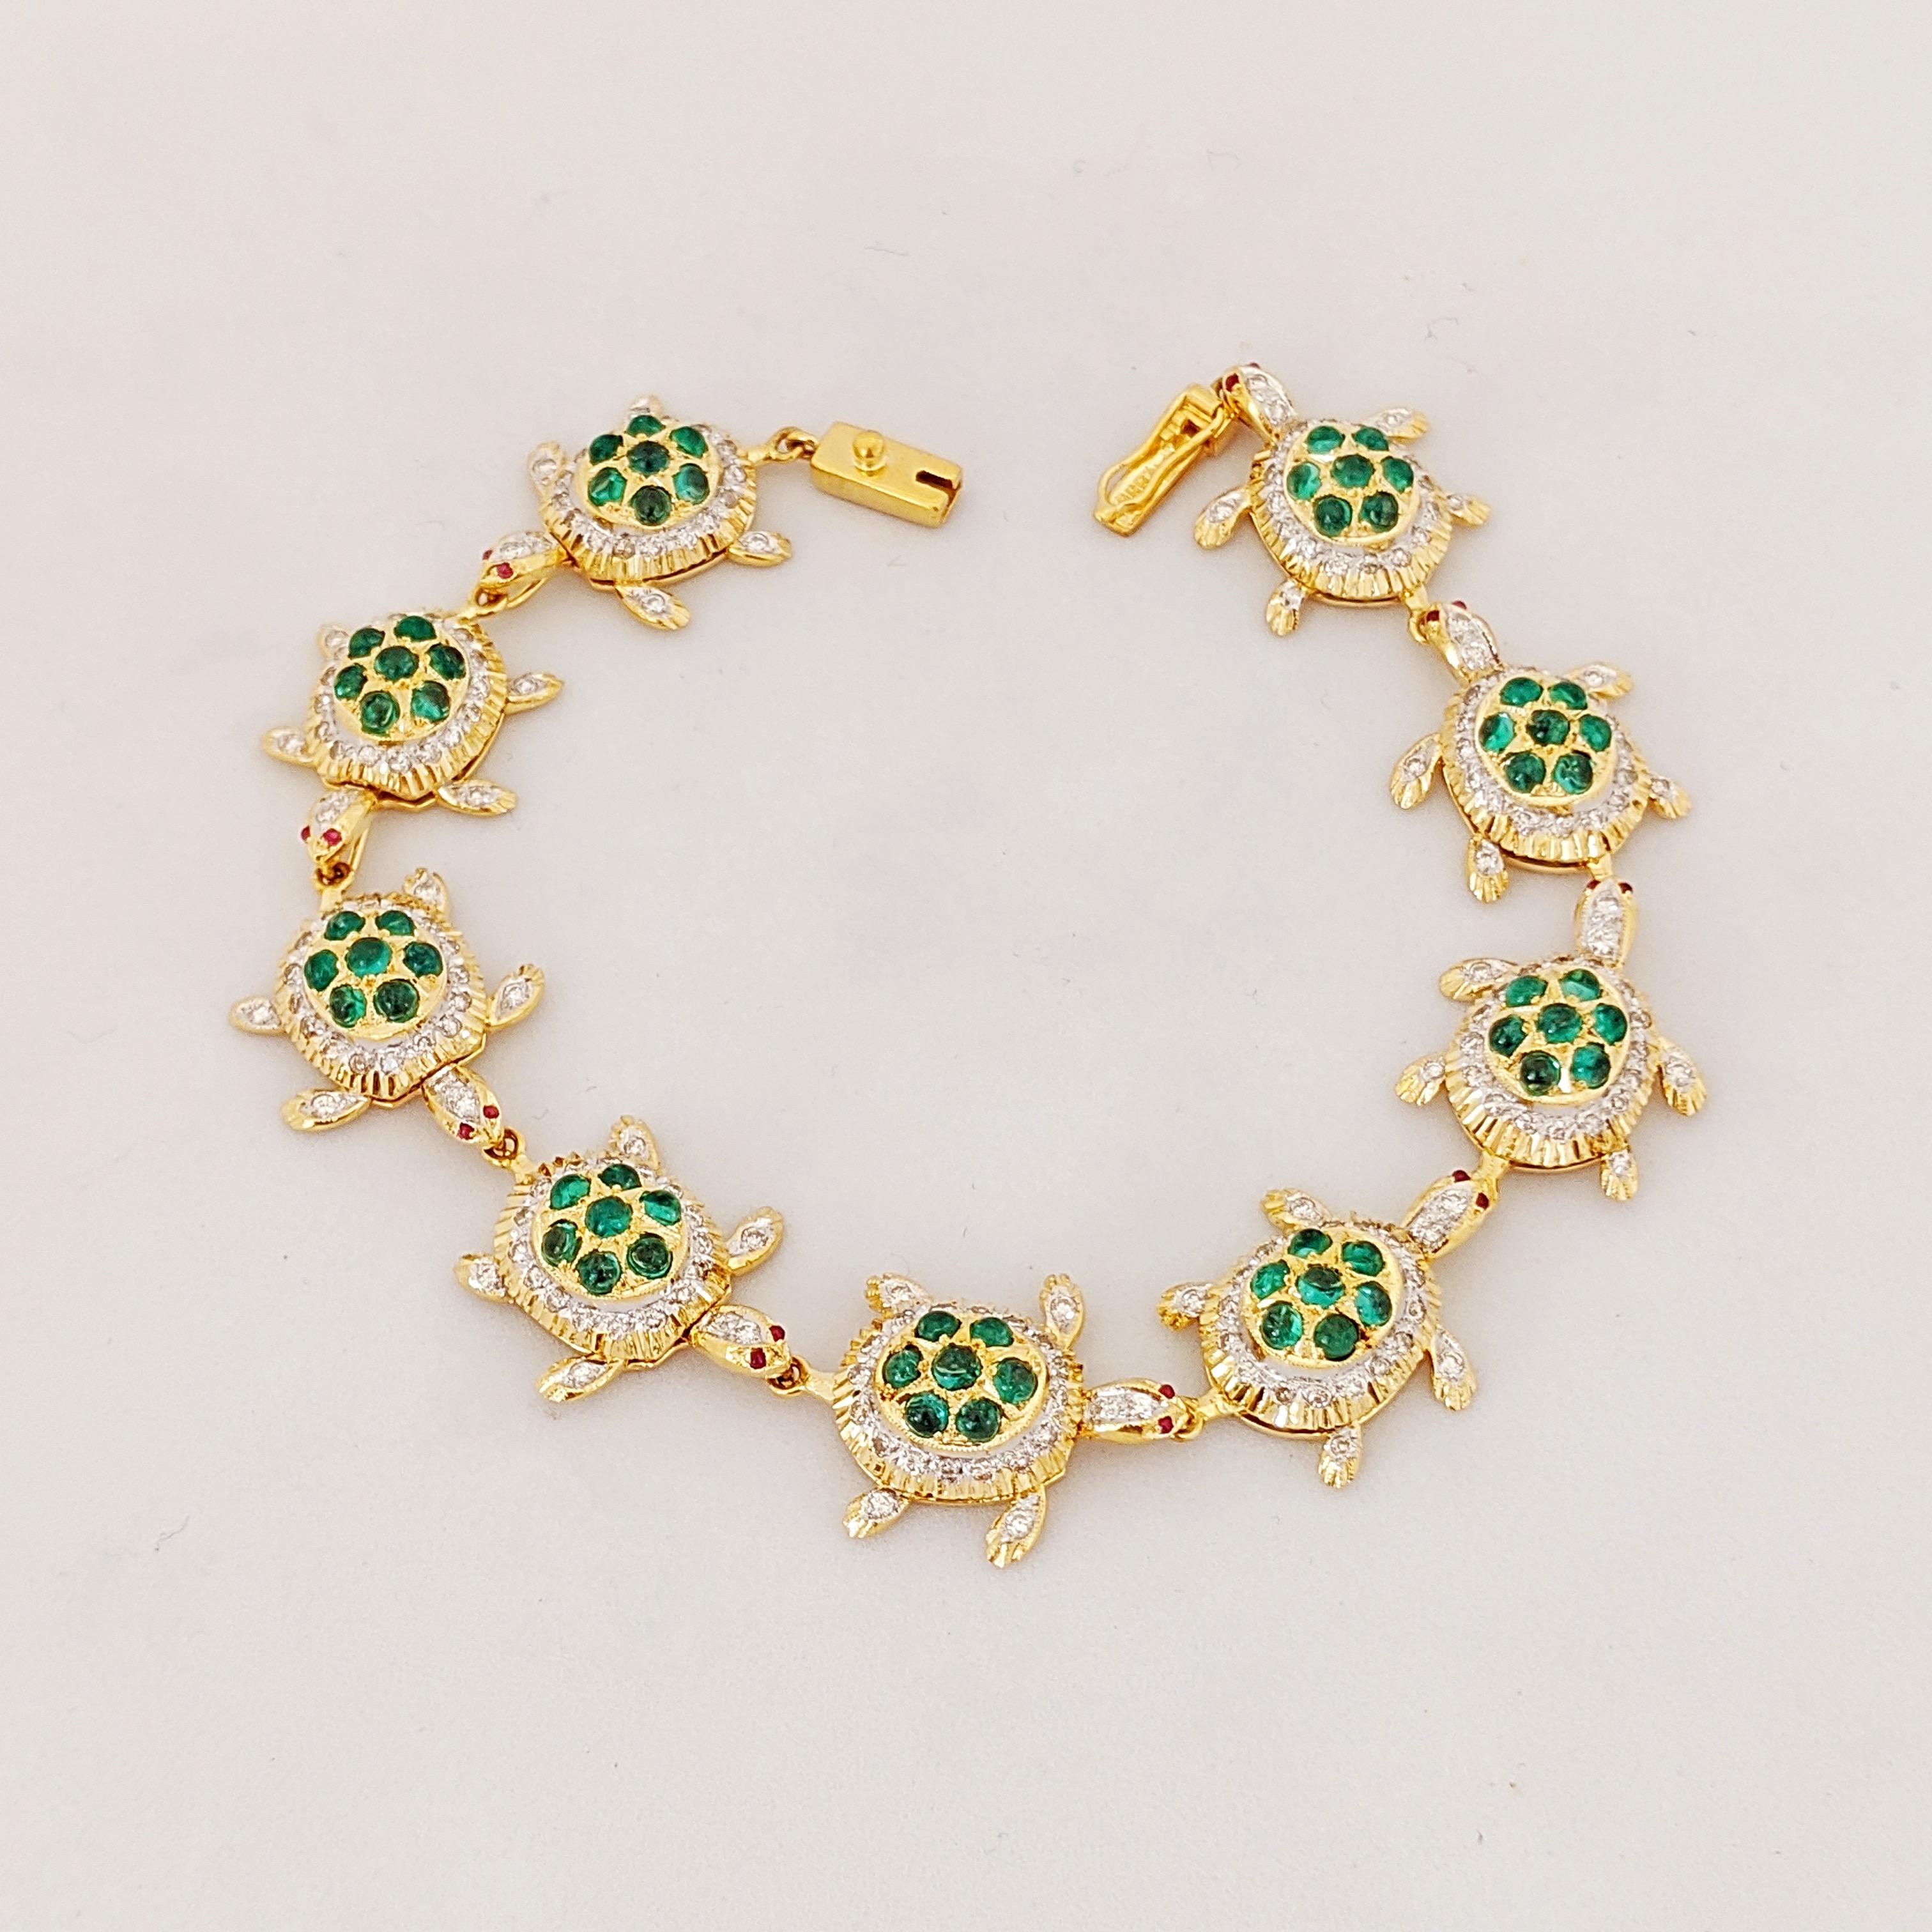 Turtles are said to represent good health and long life. This 18 karat yellow gold bracelet designed by
Assil has 9 lucky turtles . Each turtle is set with round brilliant Diamonds , beaded Emeralds, and Rubies. Each turtle measures 3/4